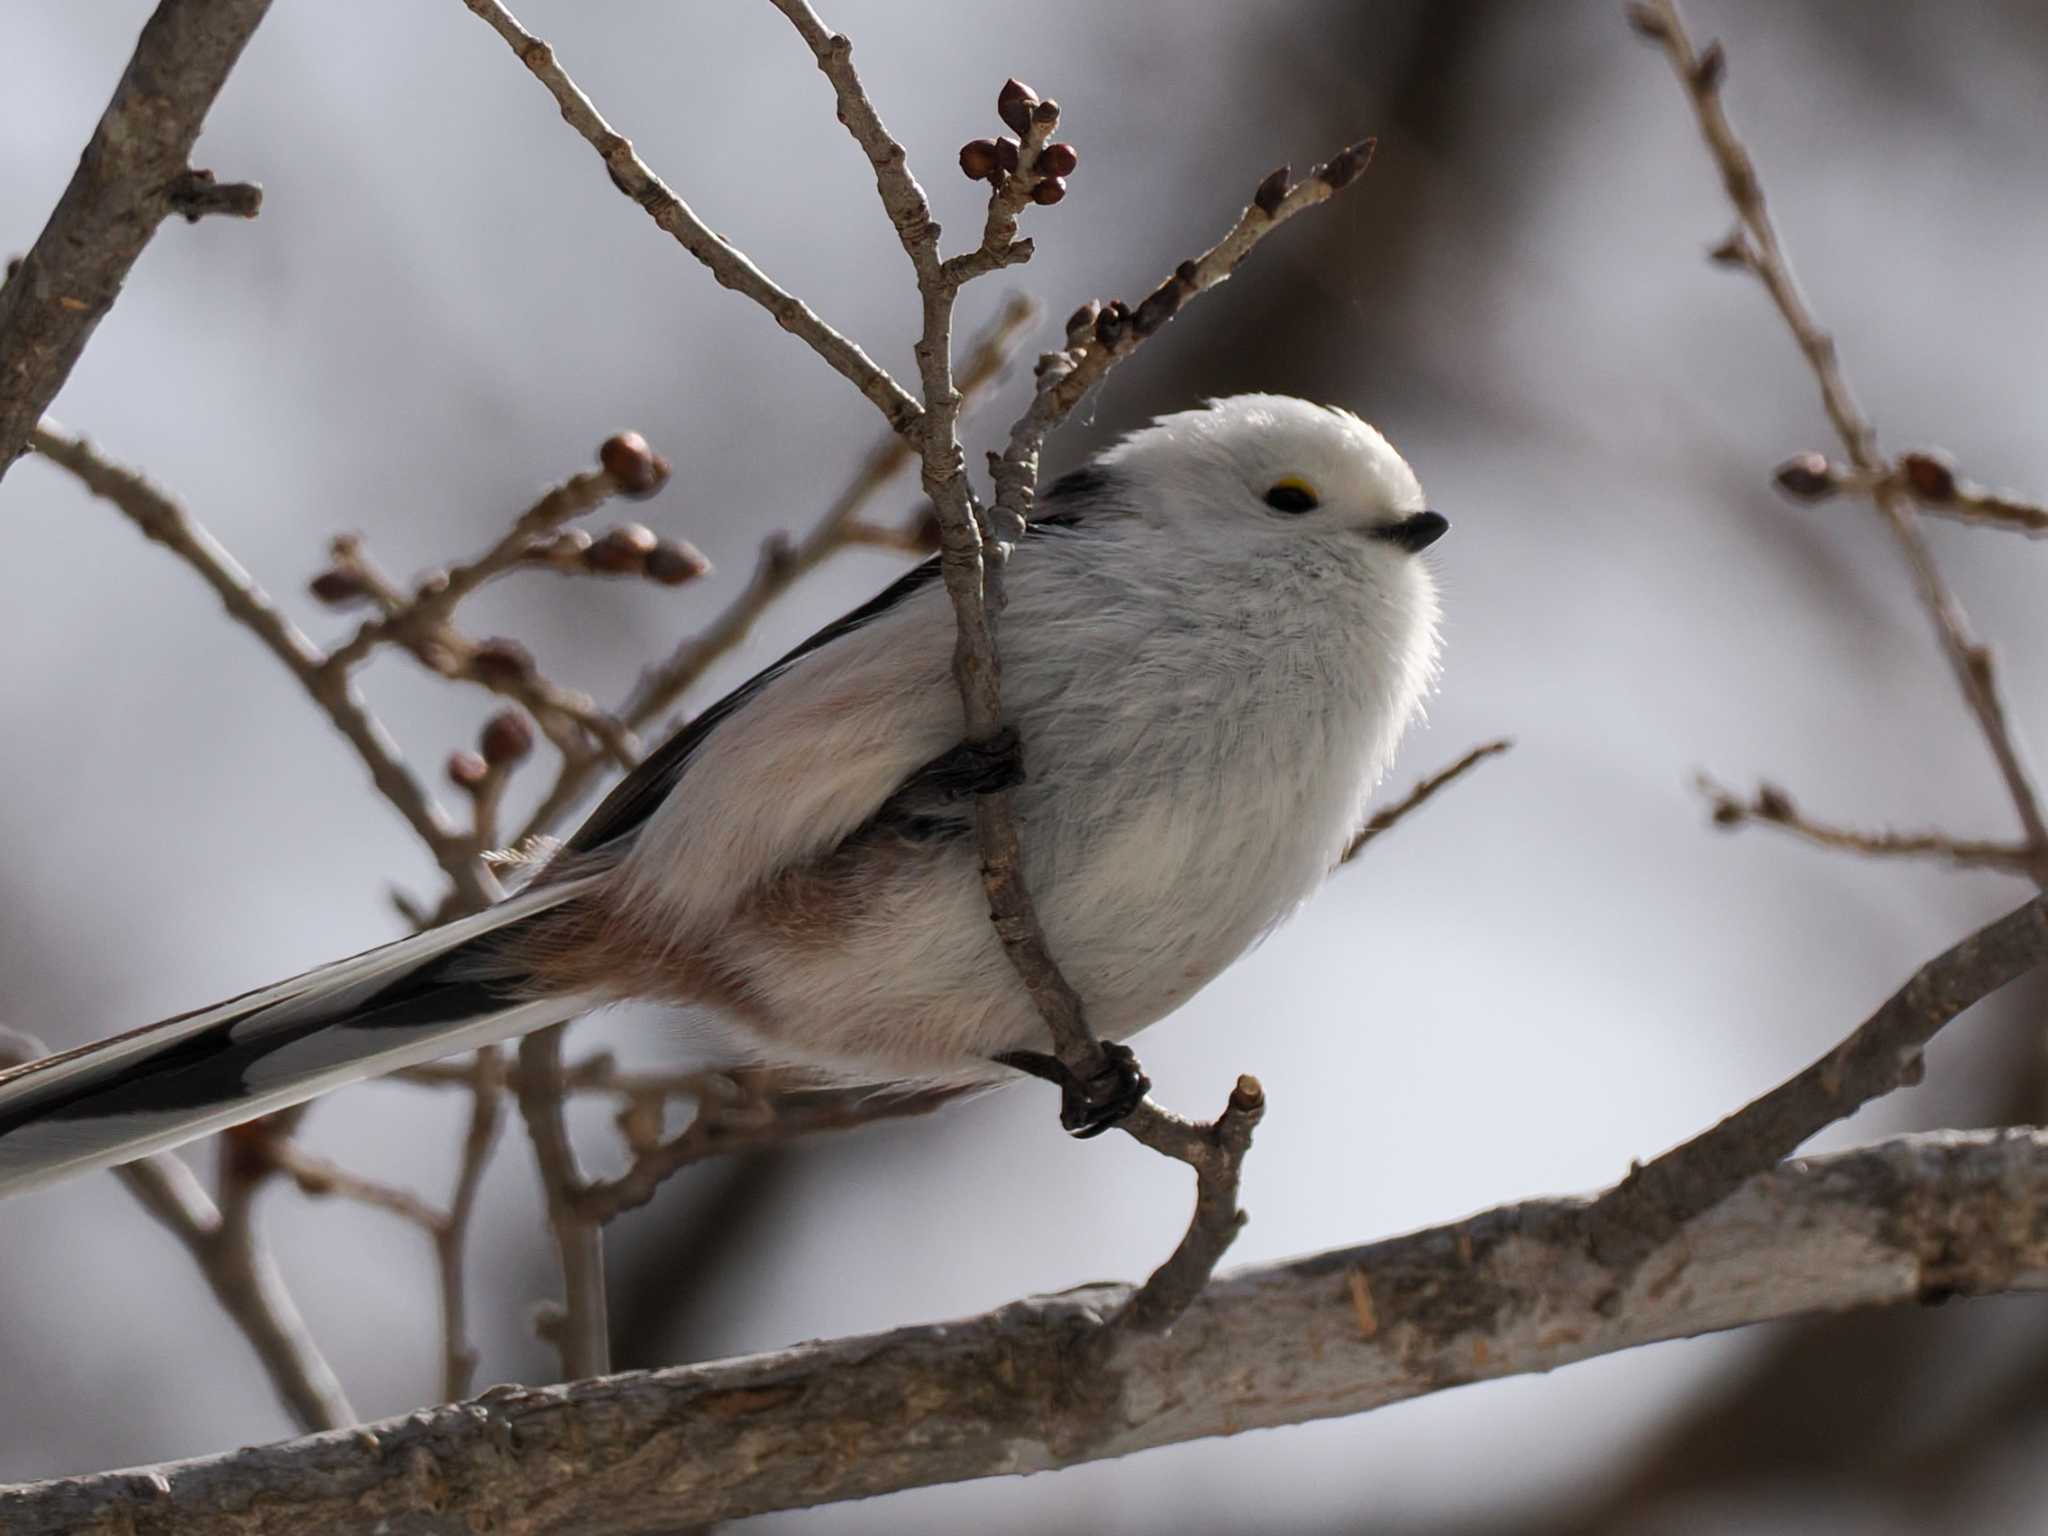 Photo of Long-tailed tit(japonicus) at 野幌森林公園 by 98_Ark (98ｱｰｸ)